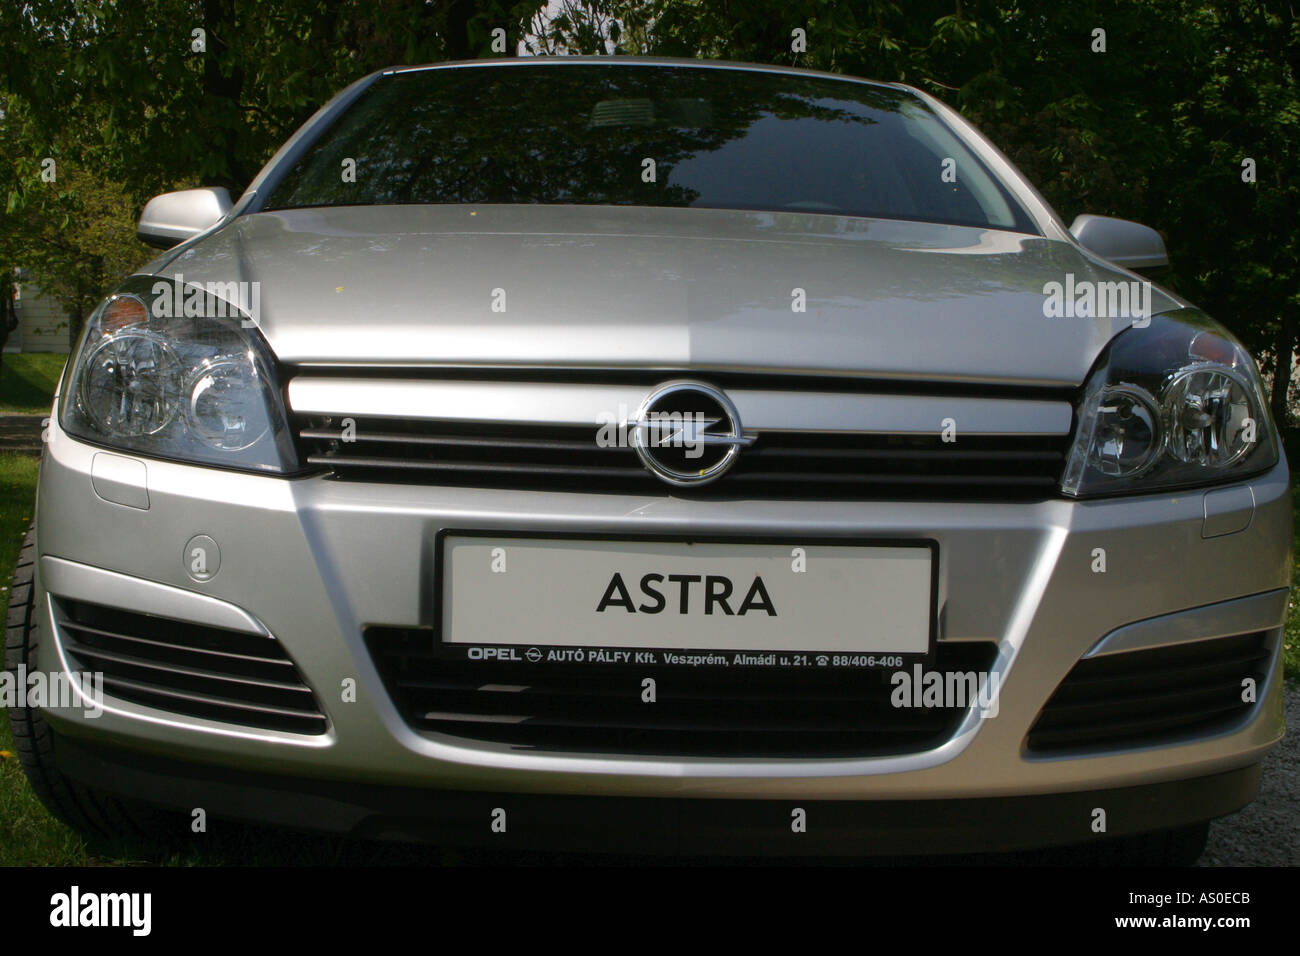 new opel astra 2004 model front car vauxhall Stock Photo